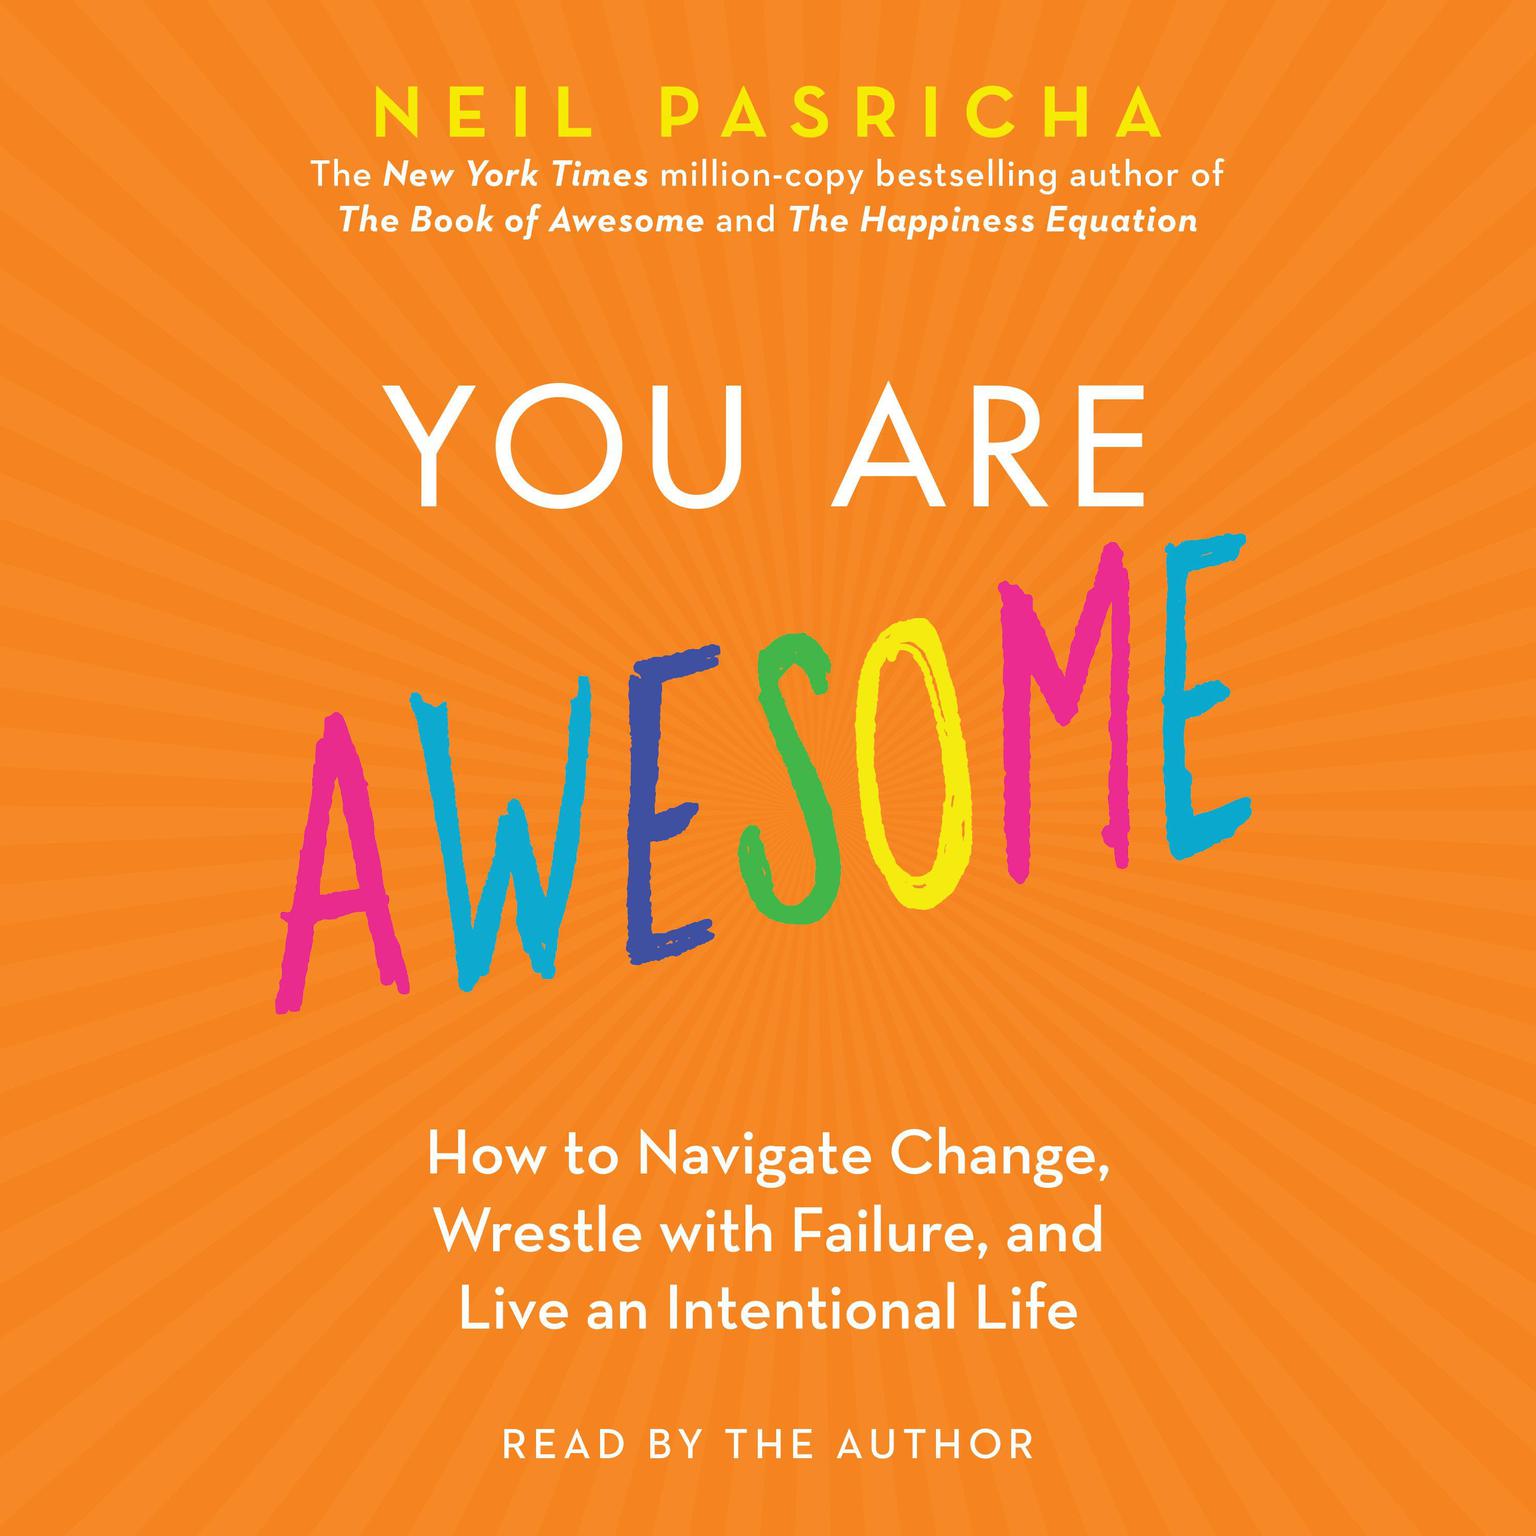 You Are Awesome: How to Navigate Change, Wrestle with Failure, and Live an Intentional Life Audiobook, by Neil Pasricha